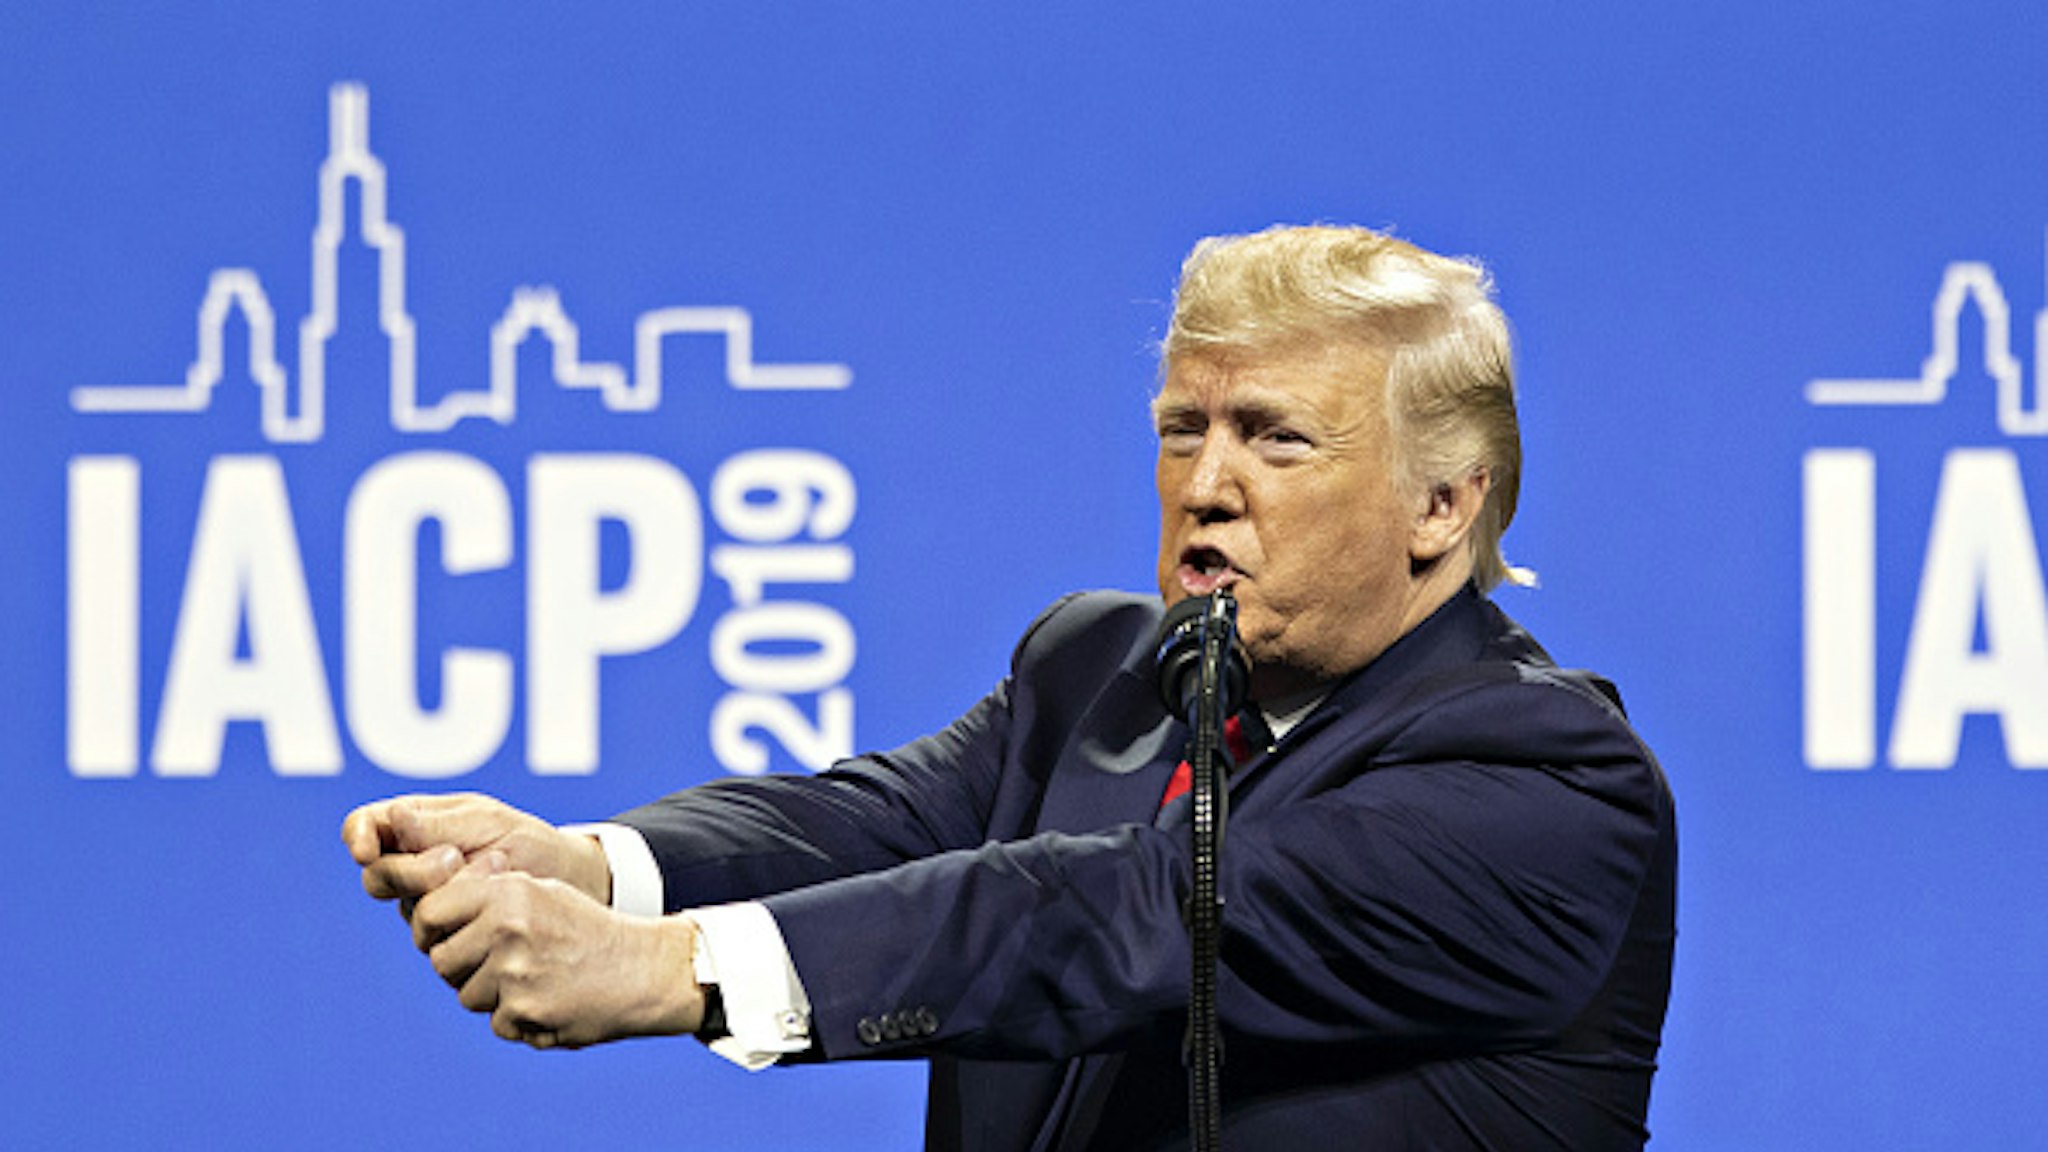 U.S. President Donald Trump speaks during the International Association of Chiefs of Police annual conference in Chicago, Illinois, U.S., on Monday, Oct. 28, 2019. Trump berated the head of Chicago's police force, faulting him for the city's murder rate and critical remarks he's made about the president.